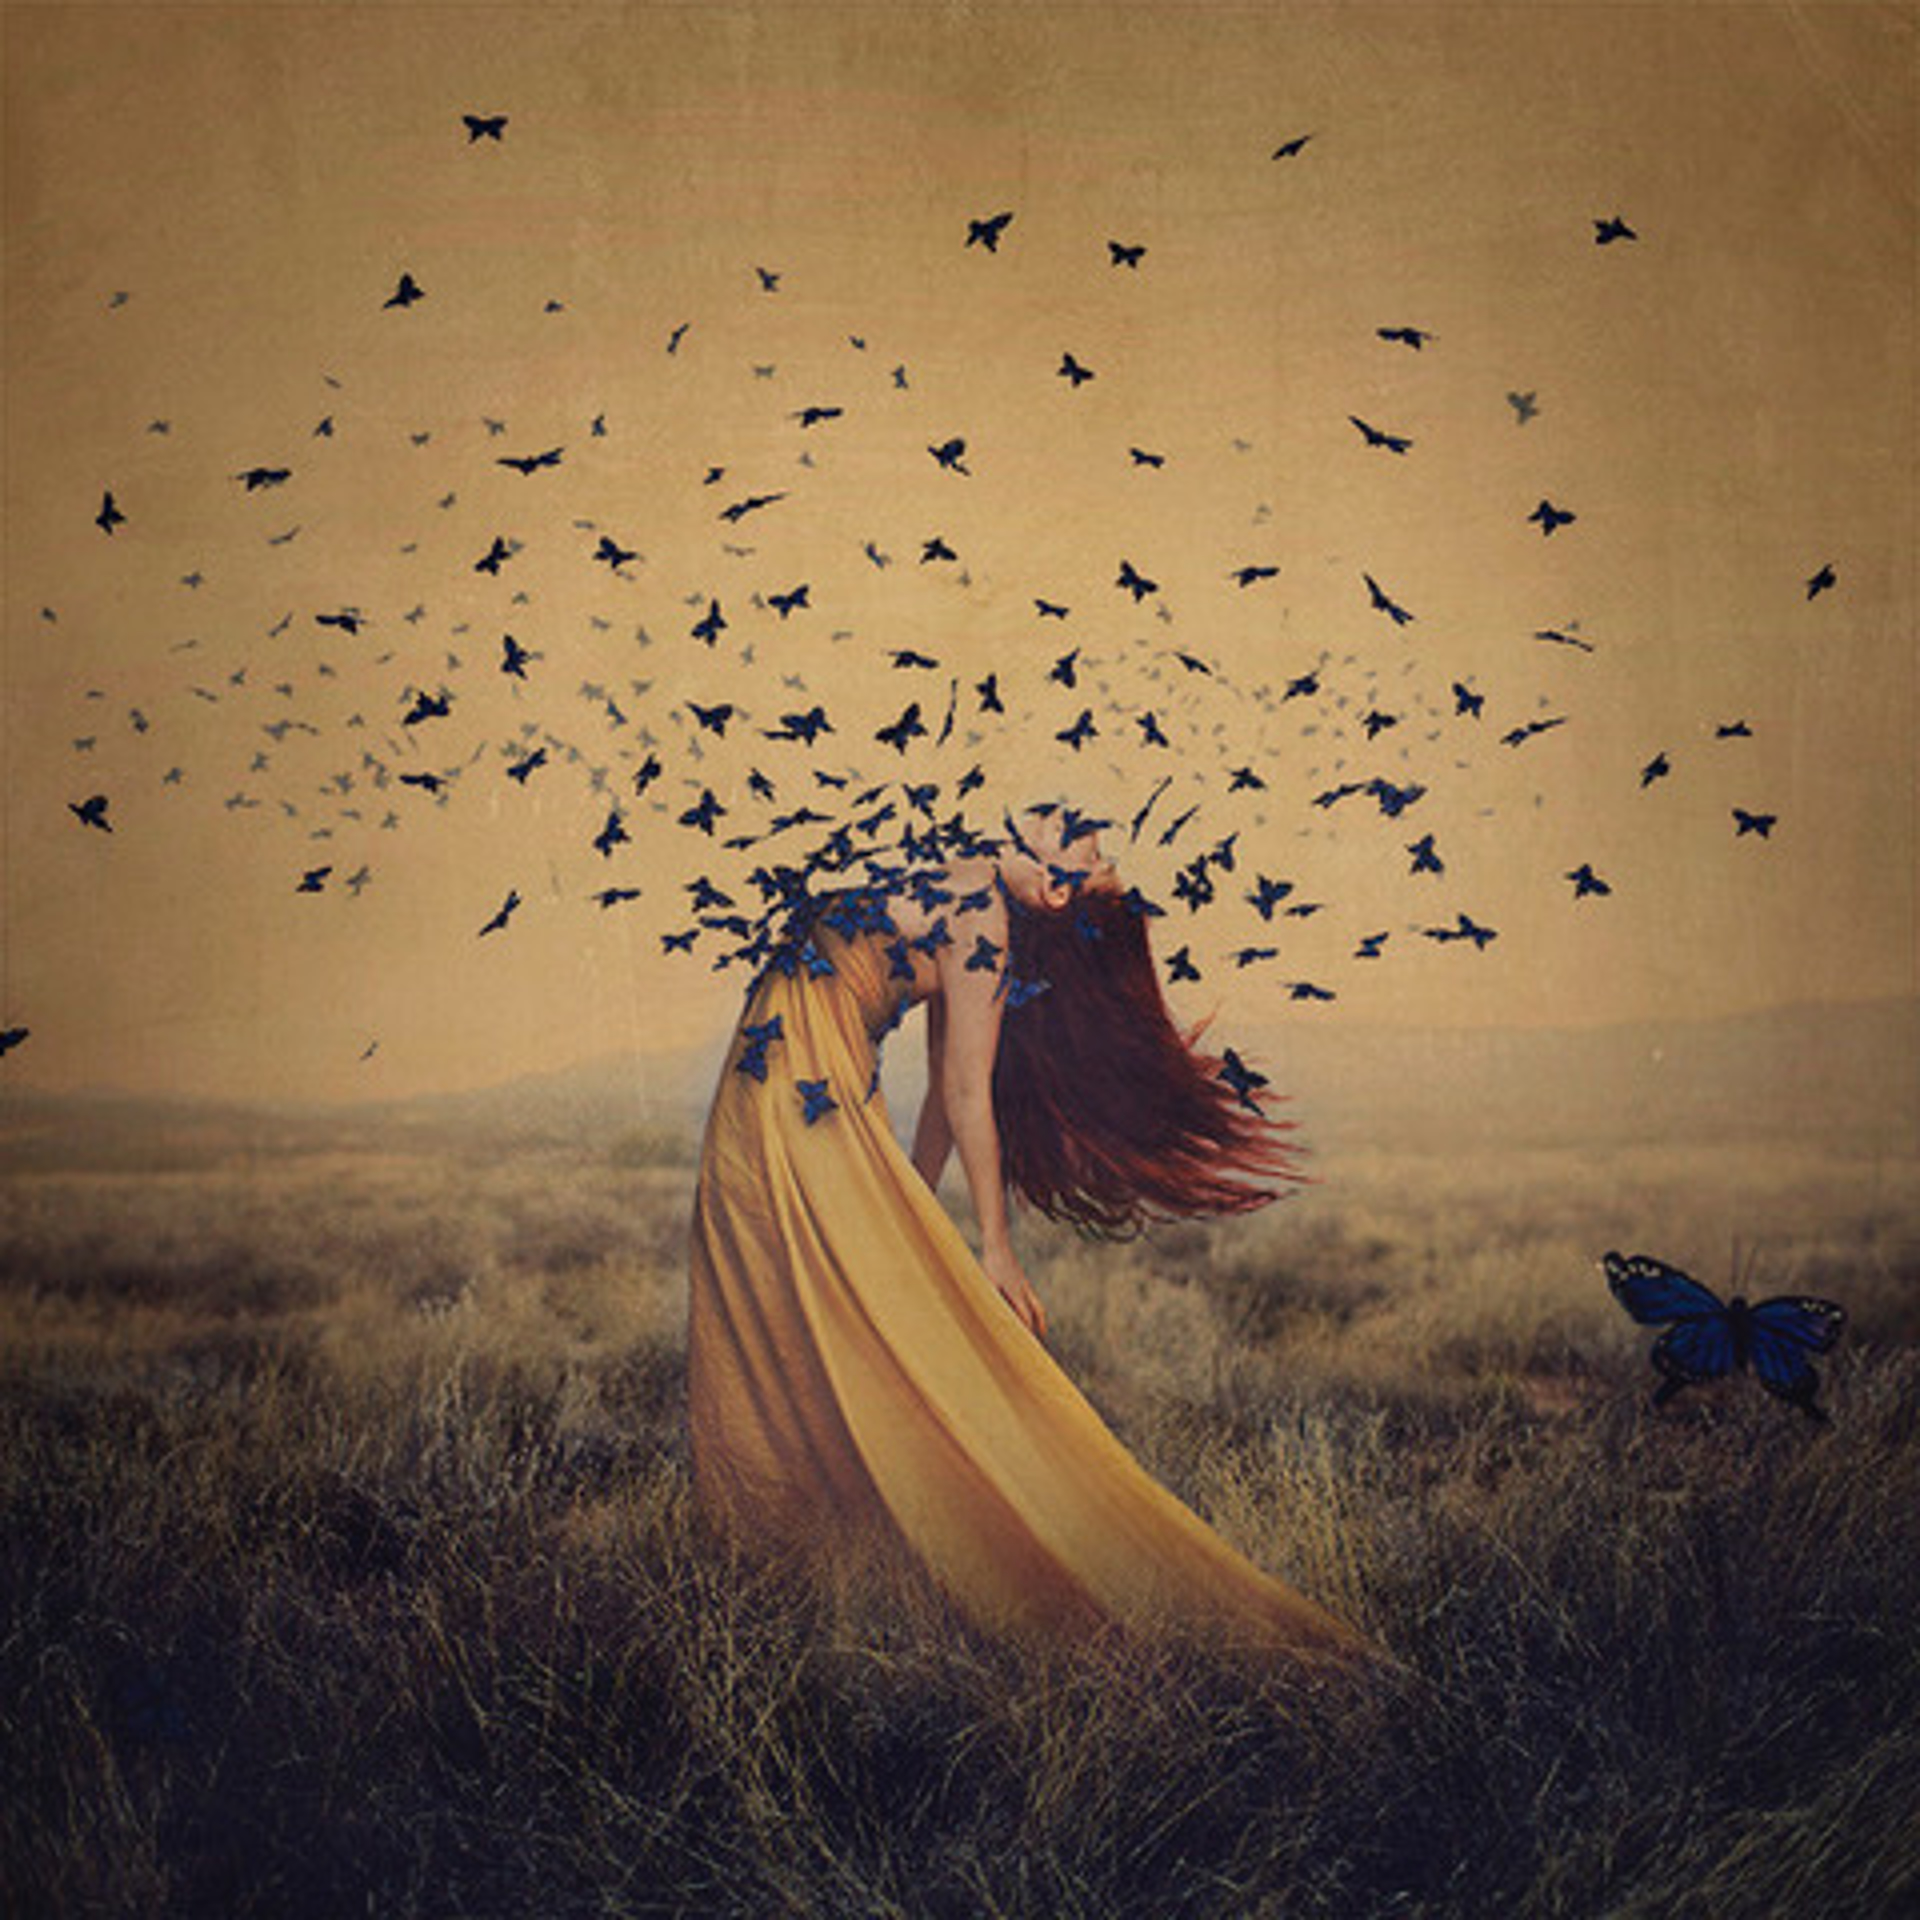 The Sound of Flying Souls, Part 2 by Brooke Shaden